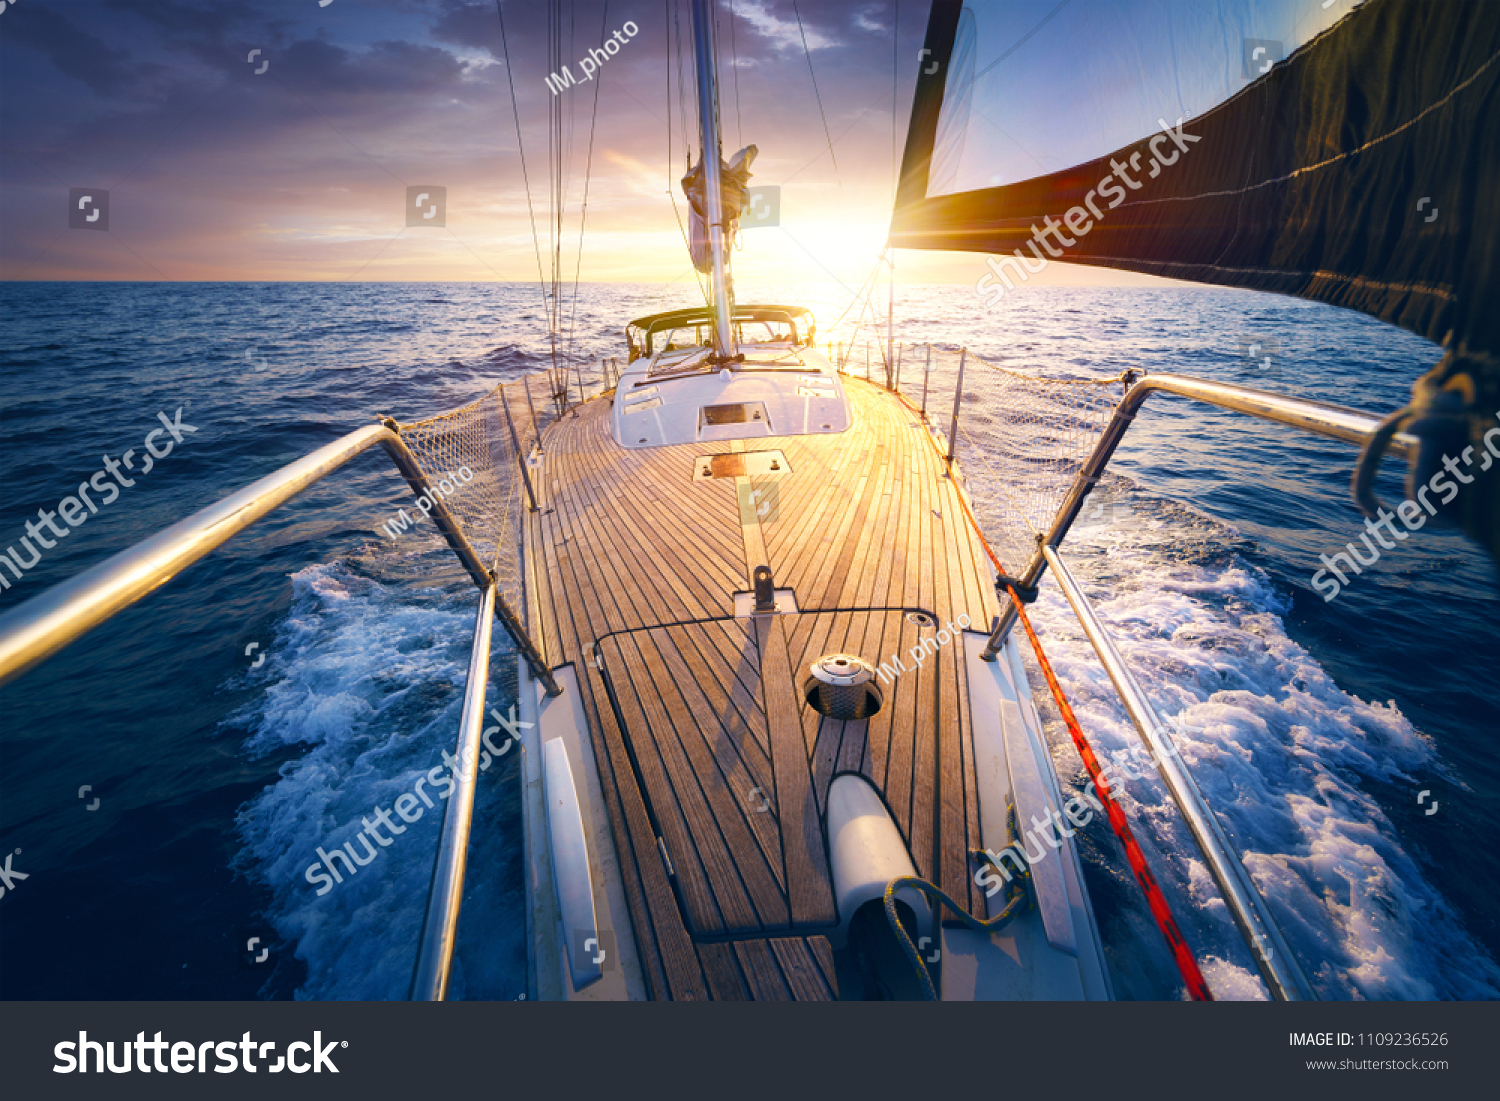 Sunset at the Sailboat deck while cruising / sailing at opened sea. Yacht with full sails up at the end of windy day. Sailing theme - background. #1109236526